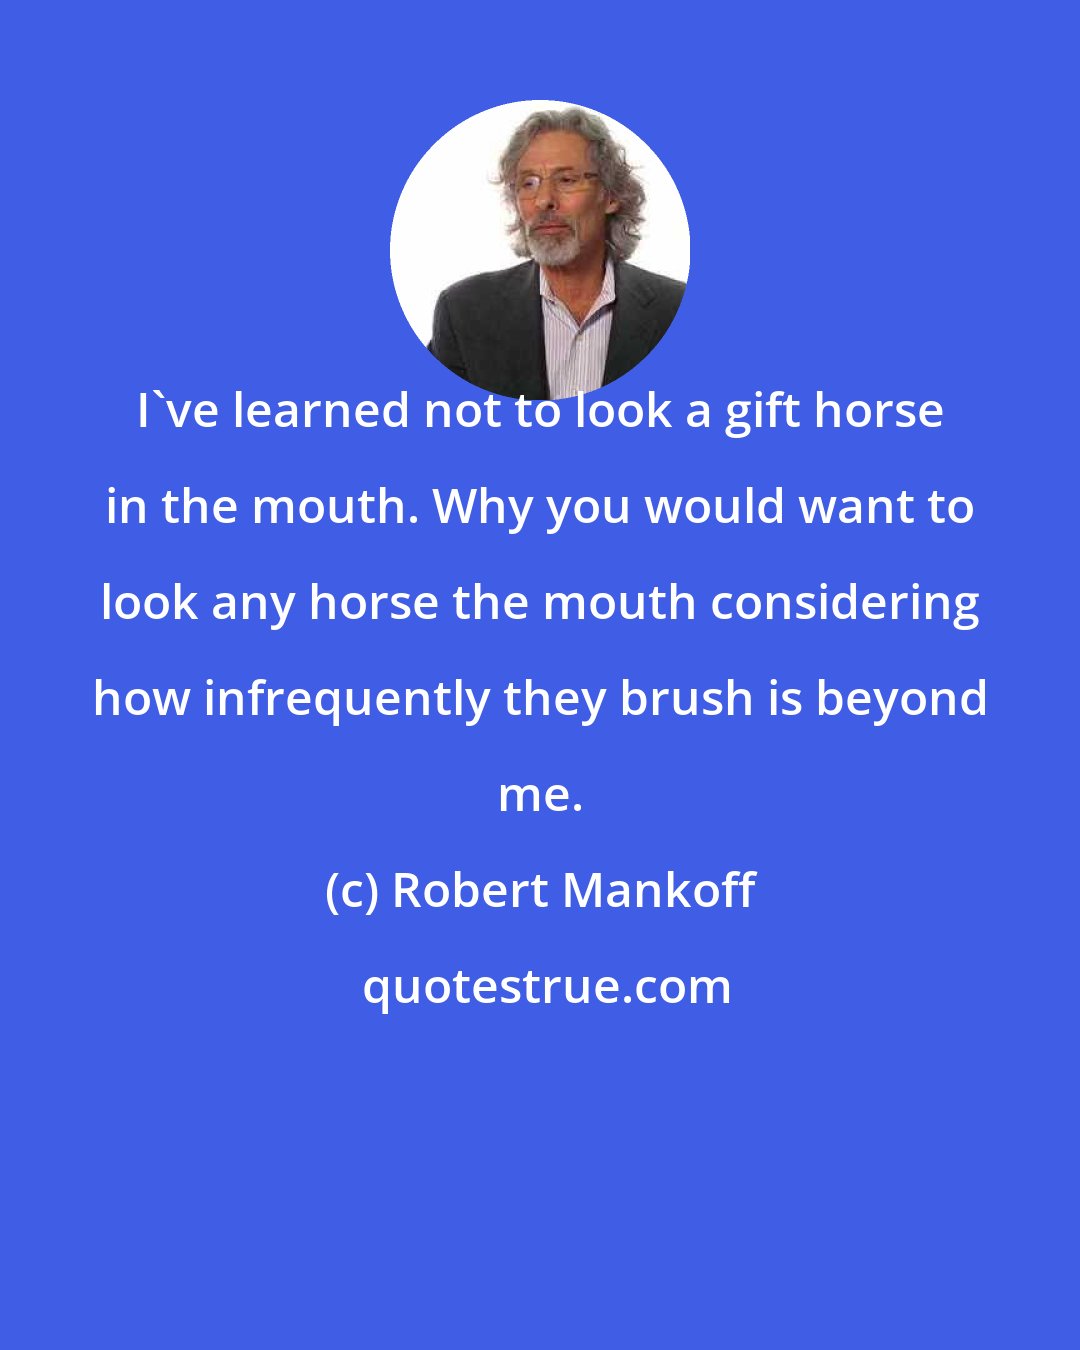 Robert Mankoff: I've learned not to look a gift horse in the mouth. Why you would want to look any horse the mouth considering how infrequently they brush is beyond me.